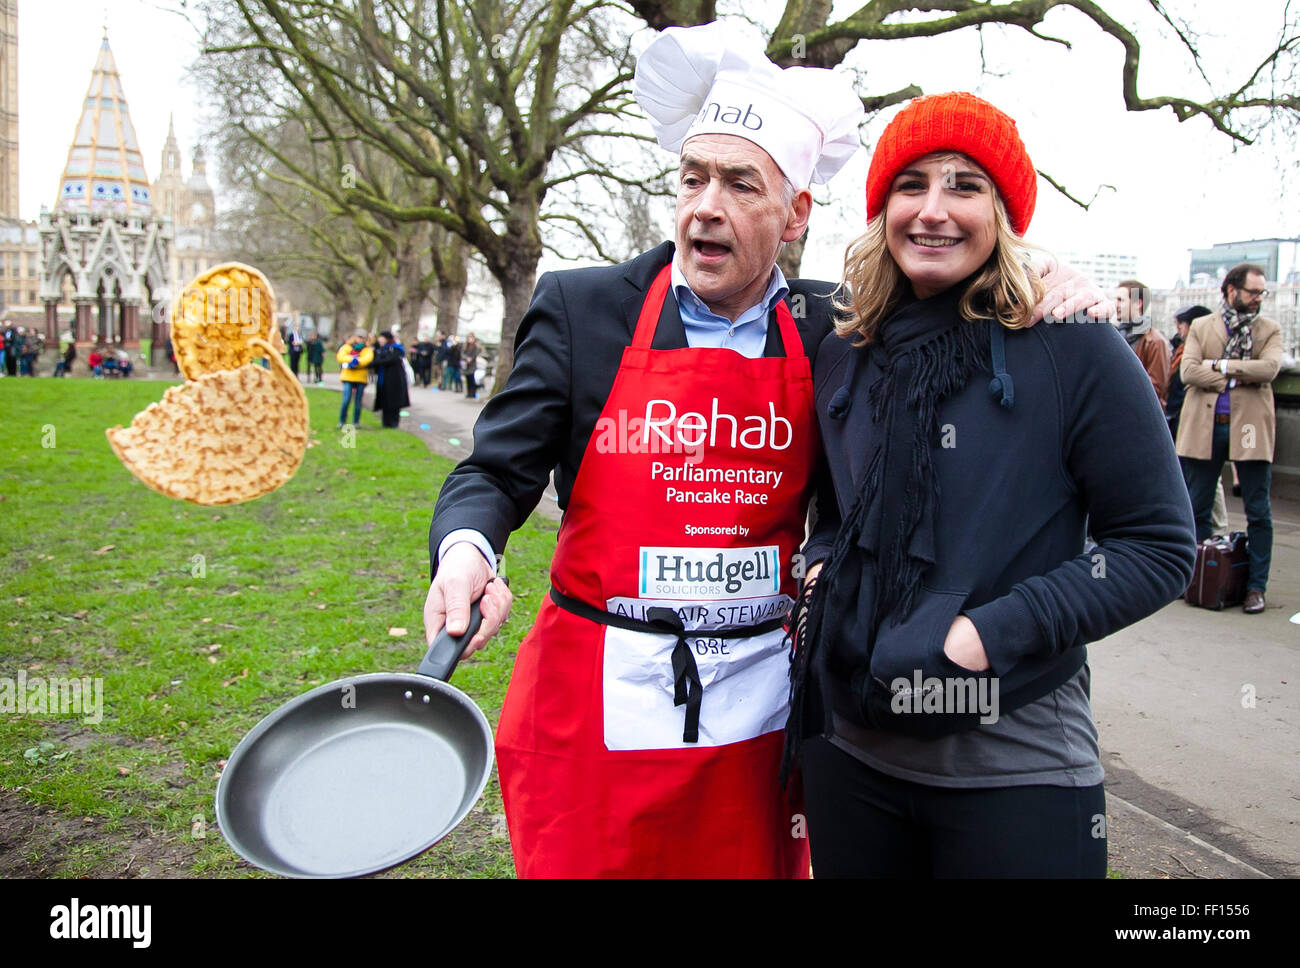 Westminster, London, United Kingdom. February 9th, 2016 -  Alastair Stewart OBE ITV News presenter pose for photos while tossing pancakes Credit:  Dinendra Haria/Alamy Live News Stock Photo